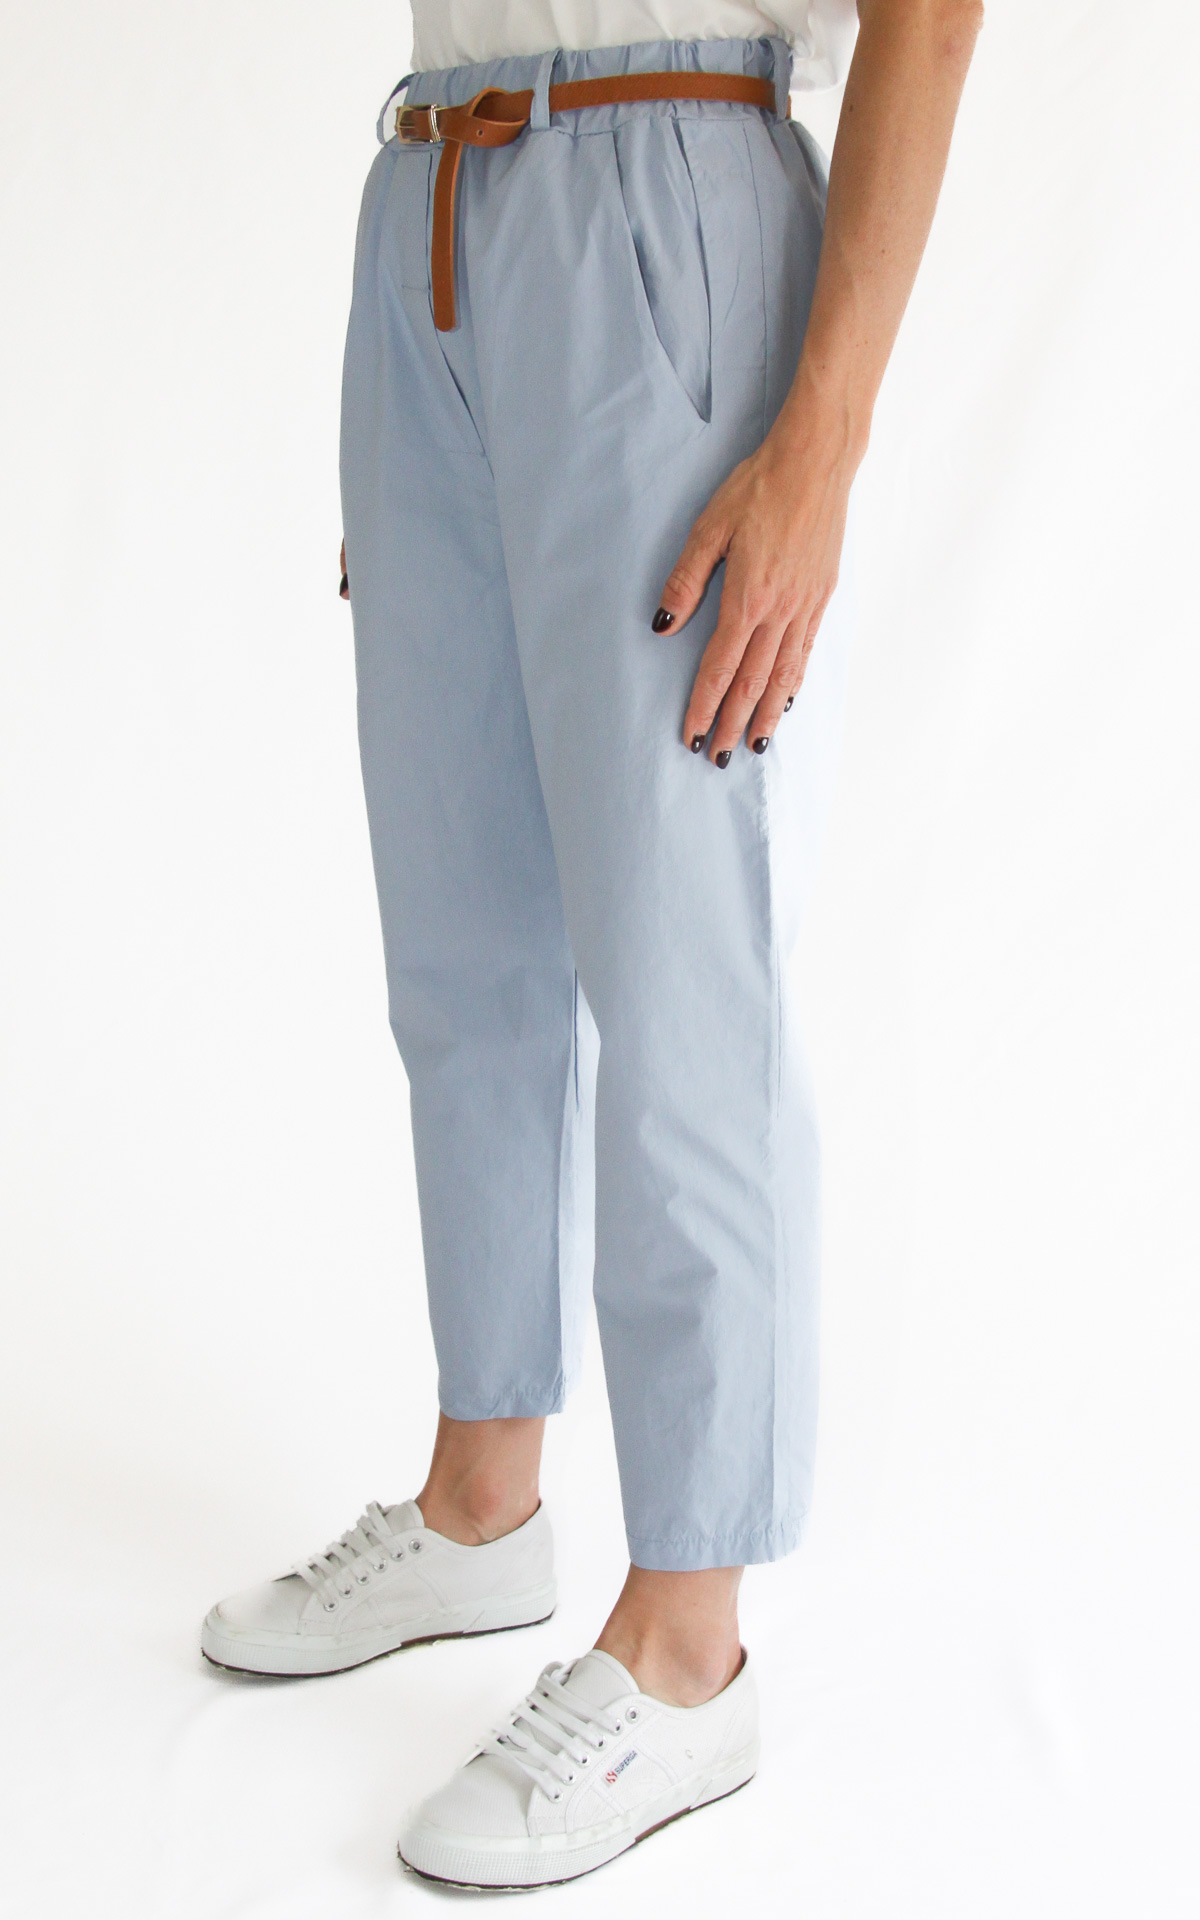 Initial - pantalone GILLY - polvere